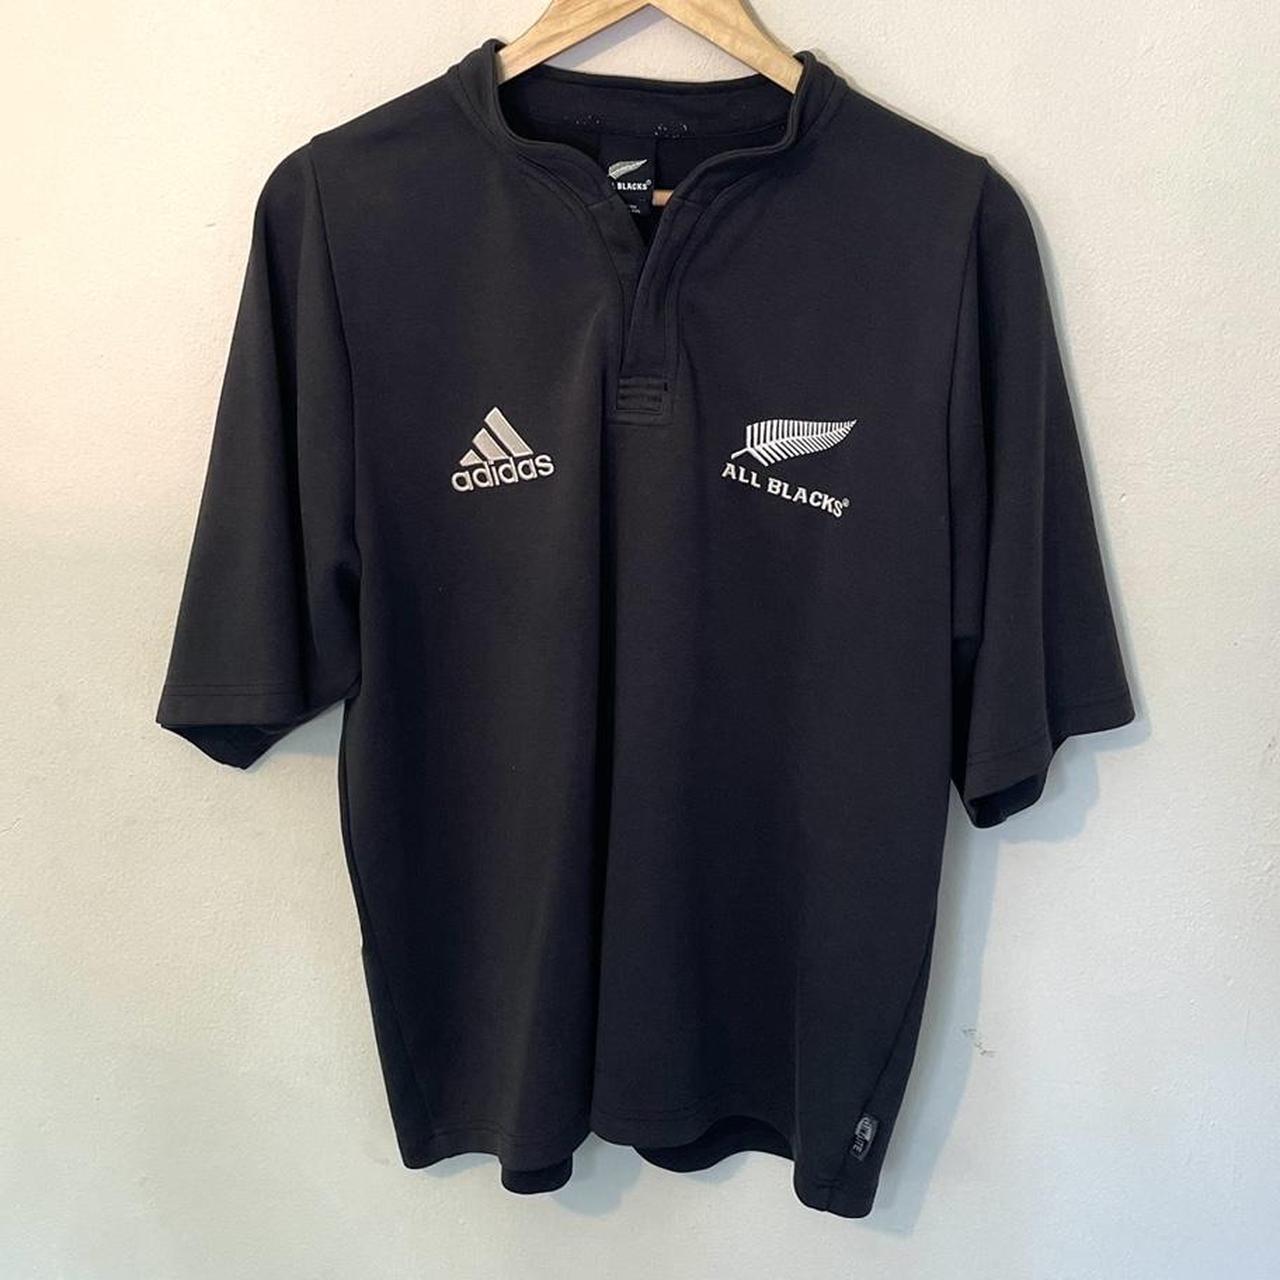 Vintage New Zealand Rugby jersey - climacool all... - Depop